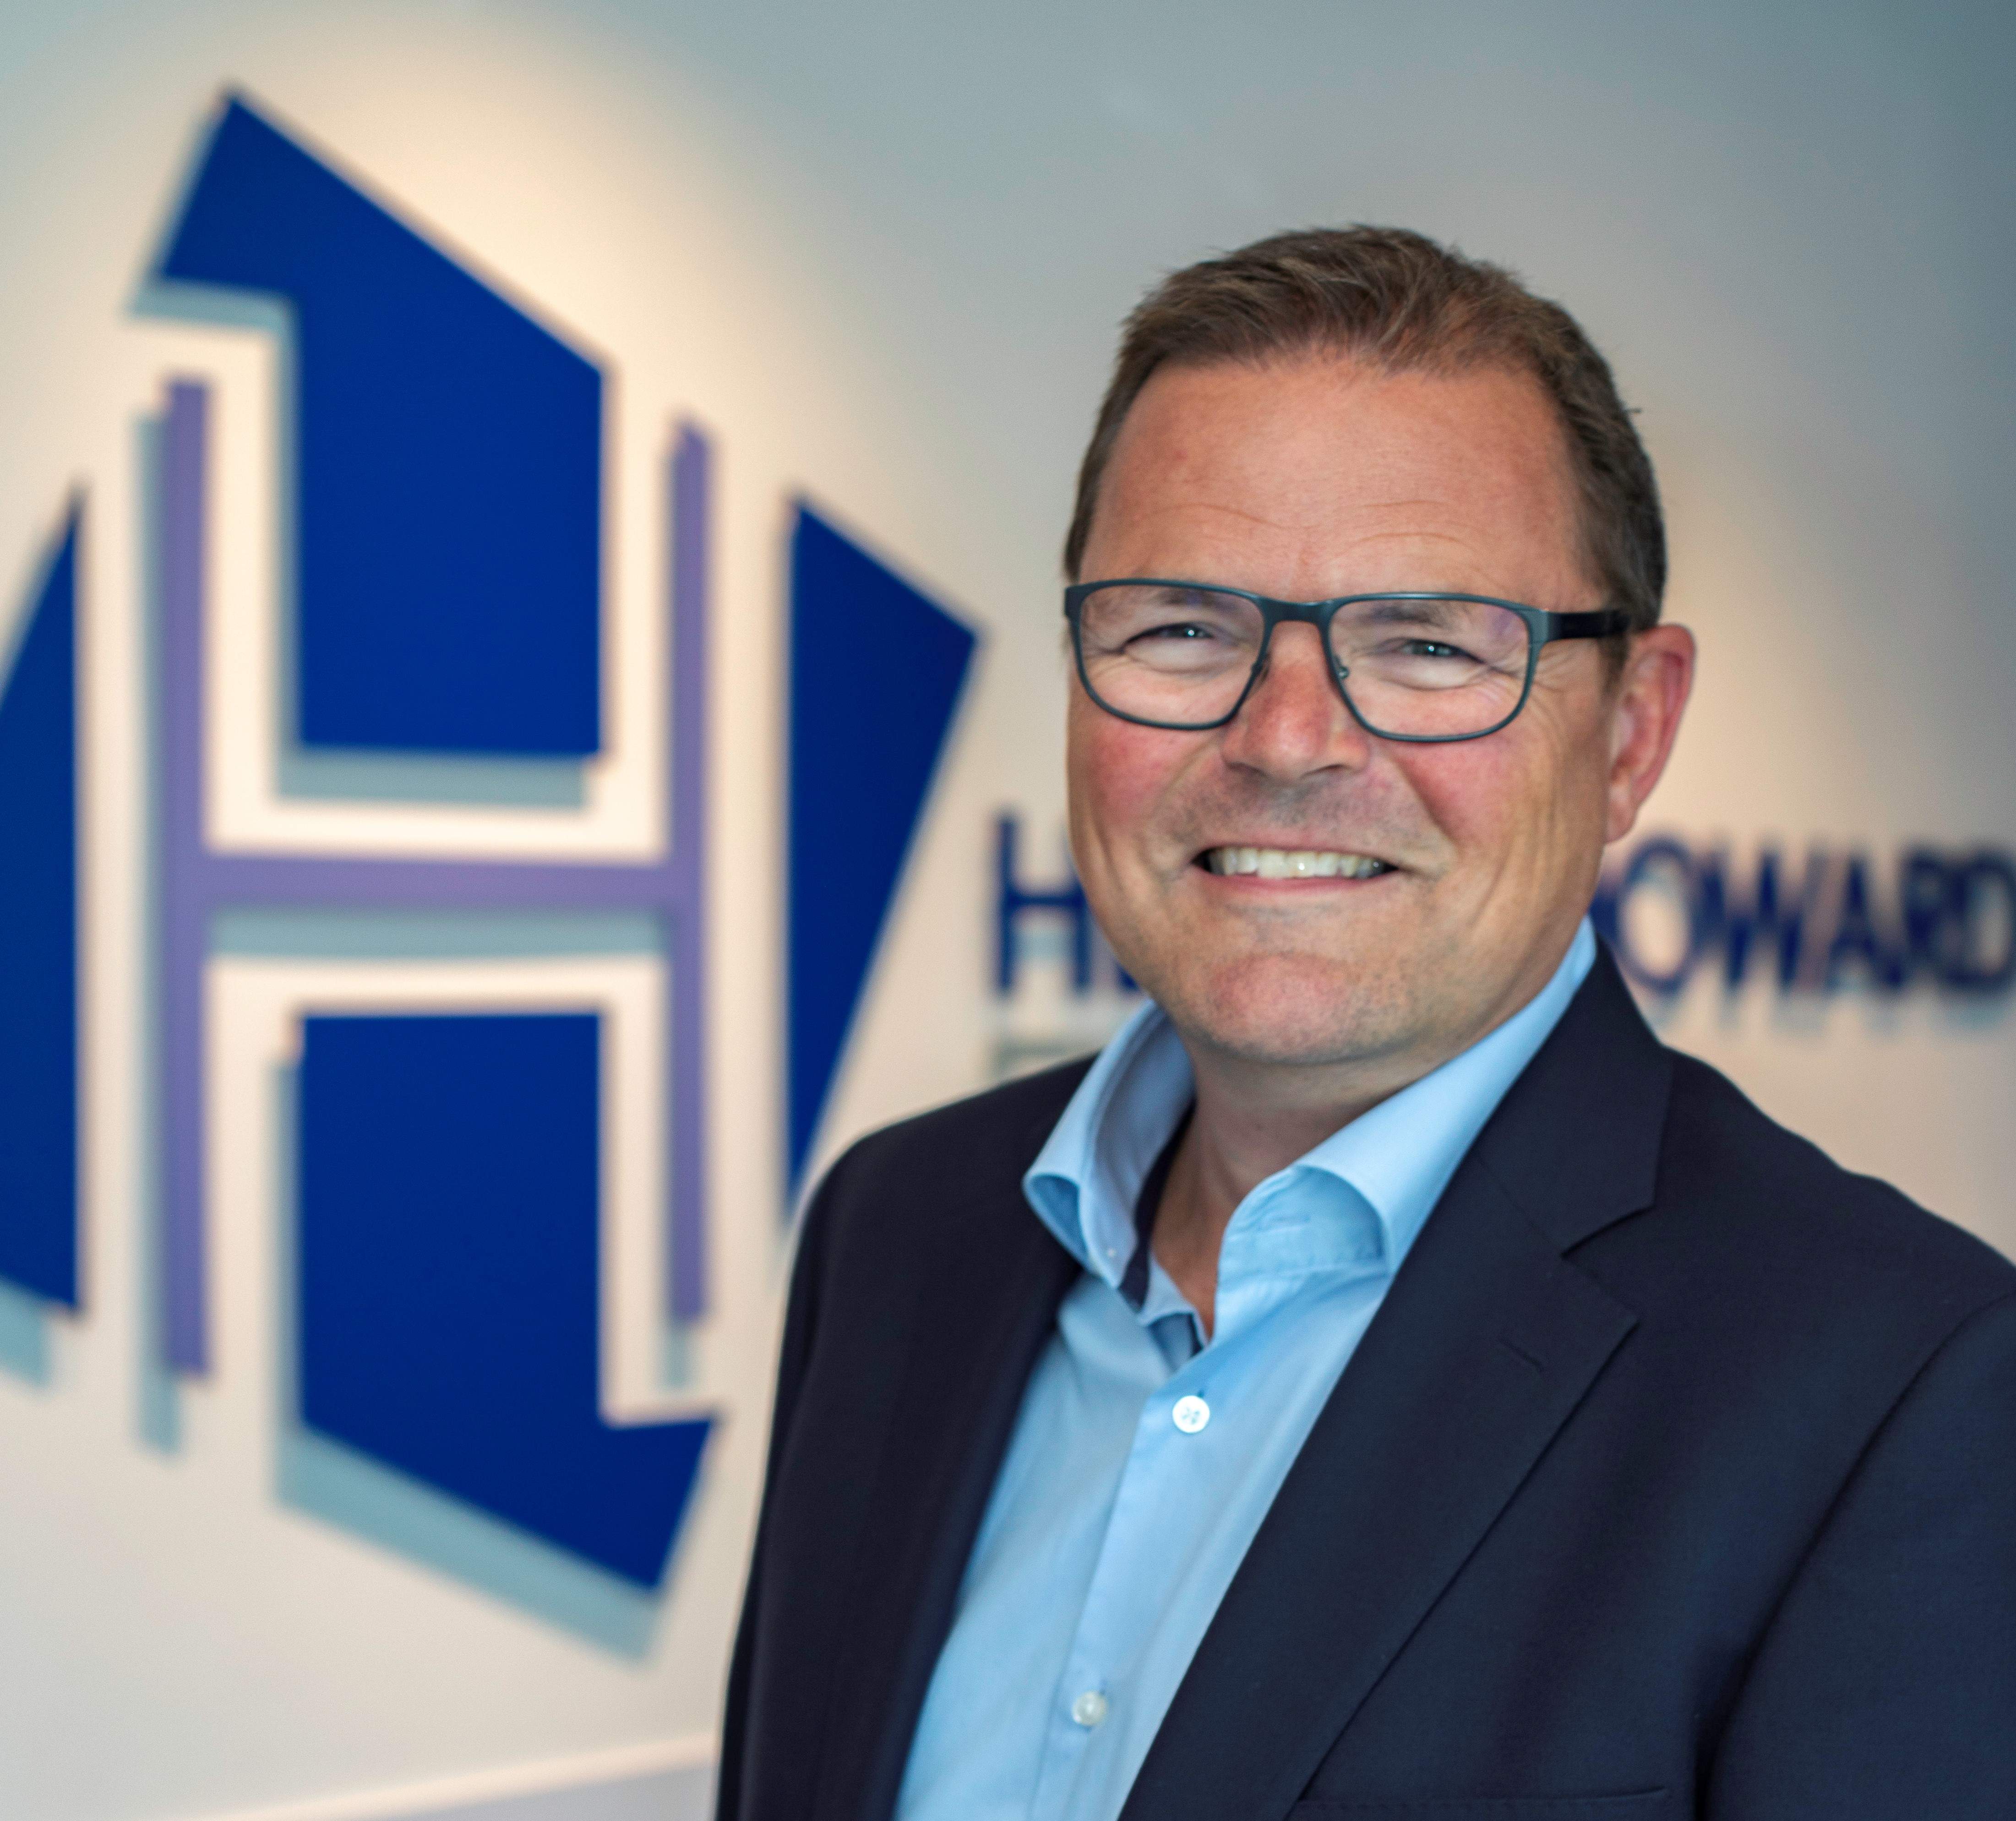 HHF results for H1 show 50% increase in own book lending